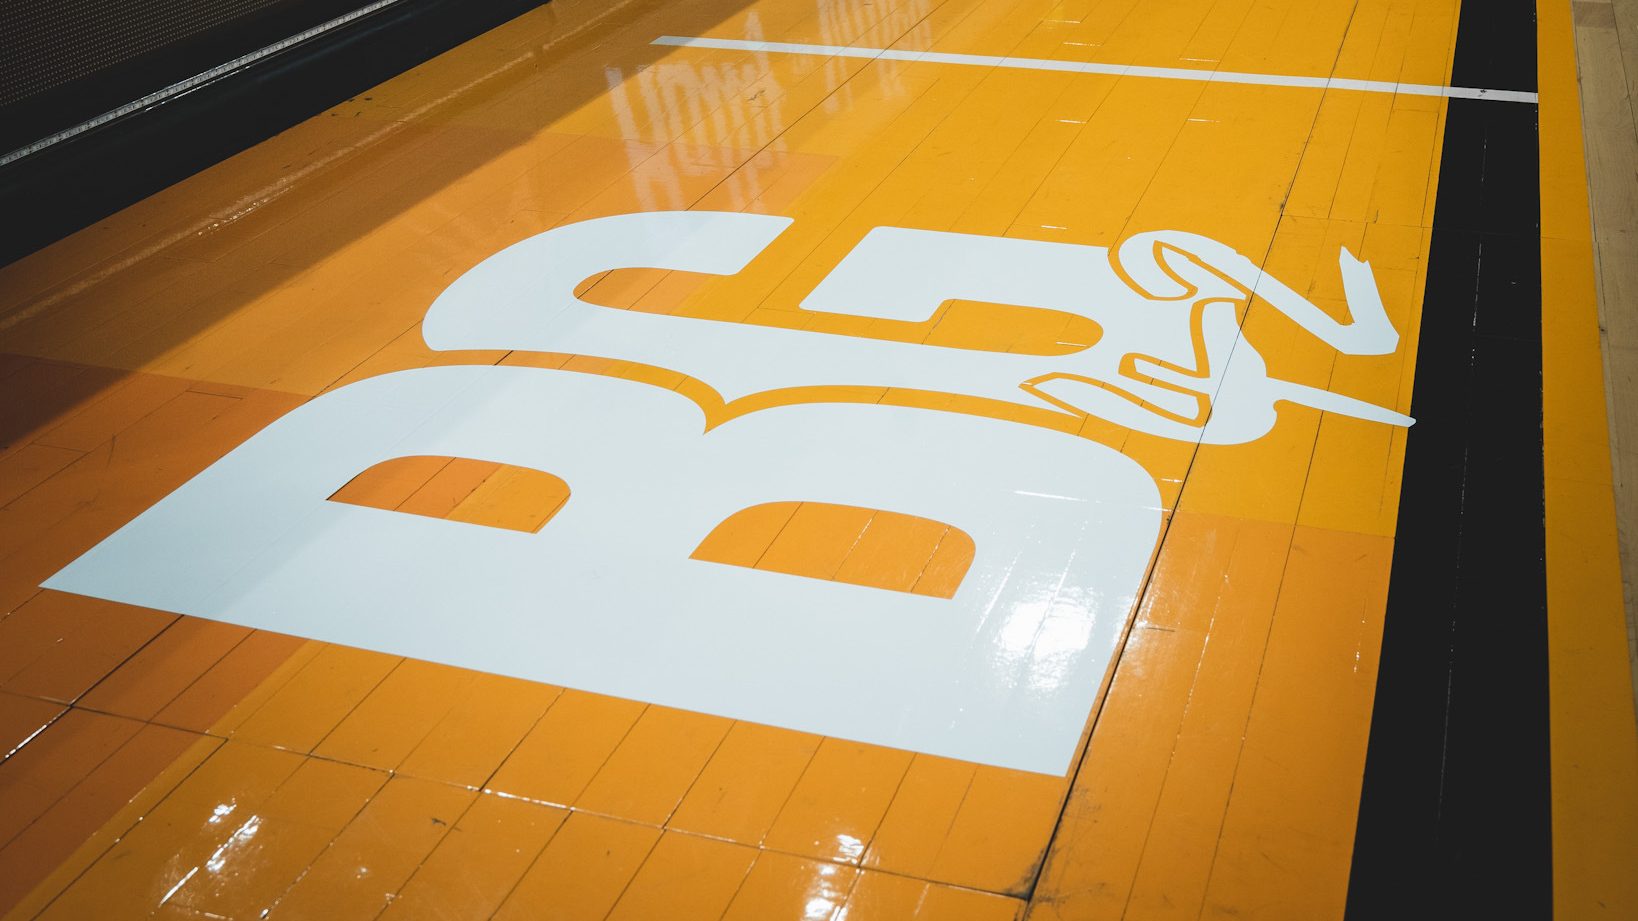 Brittney Griner decal at center court on the Phoenix Suns court in the NBA playoffs. DAPS is supporting BG by donating proceeds to the Brittney Griner defense fund.
Image via Arizona Sports